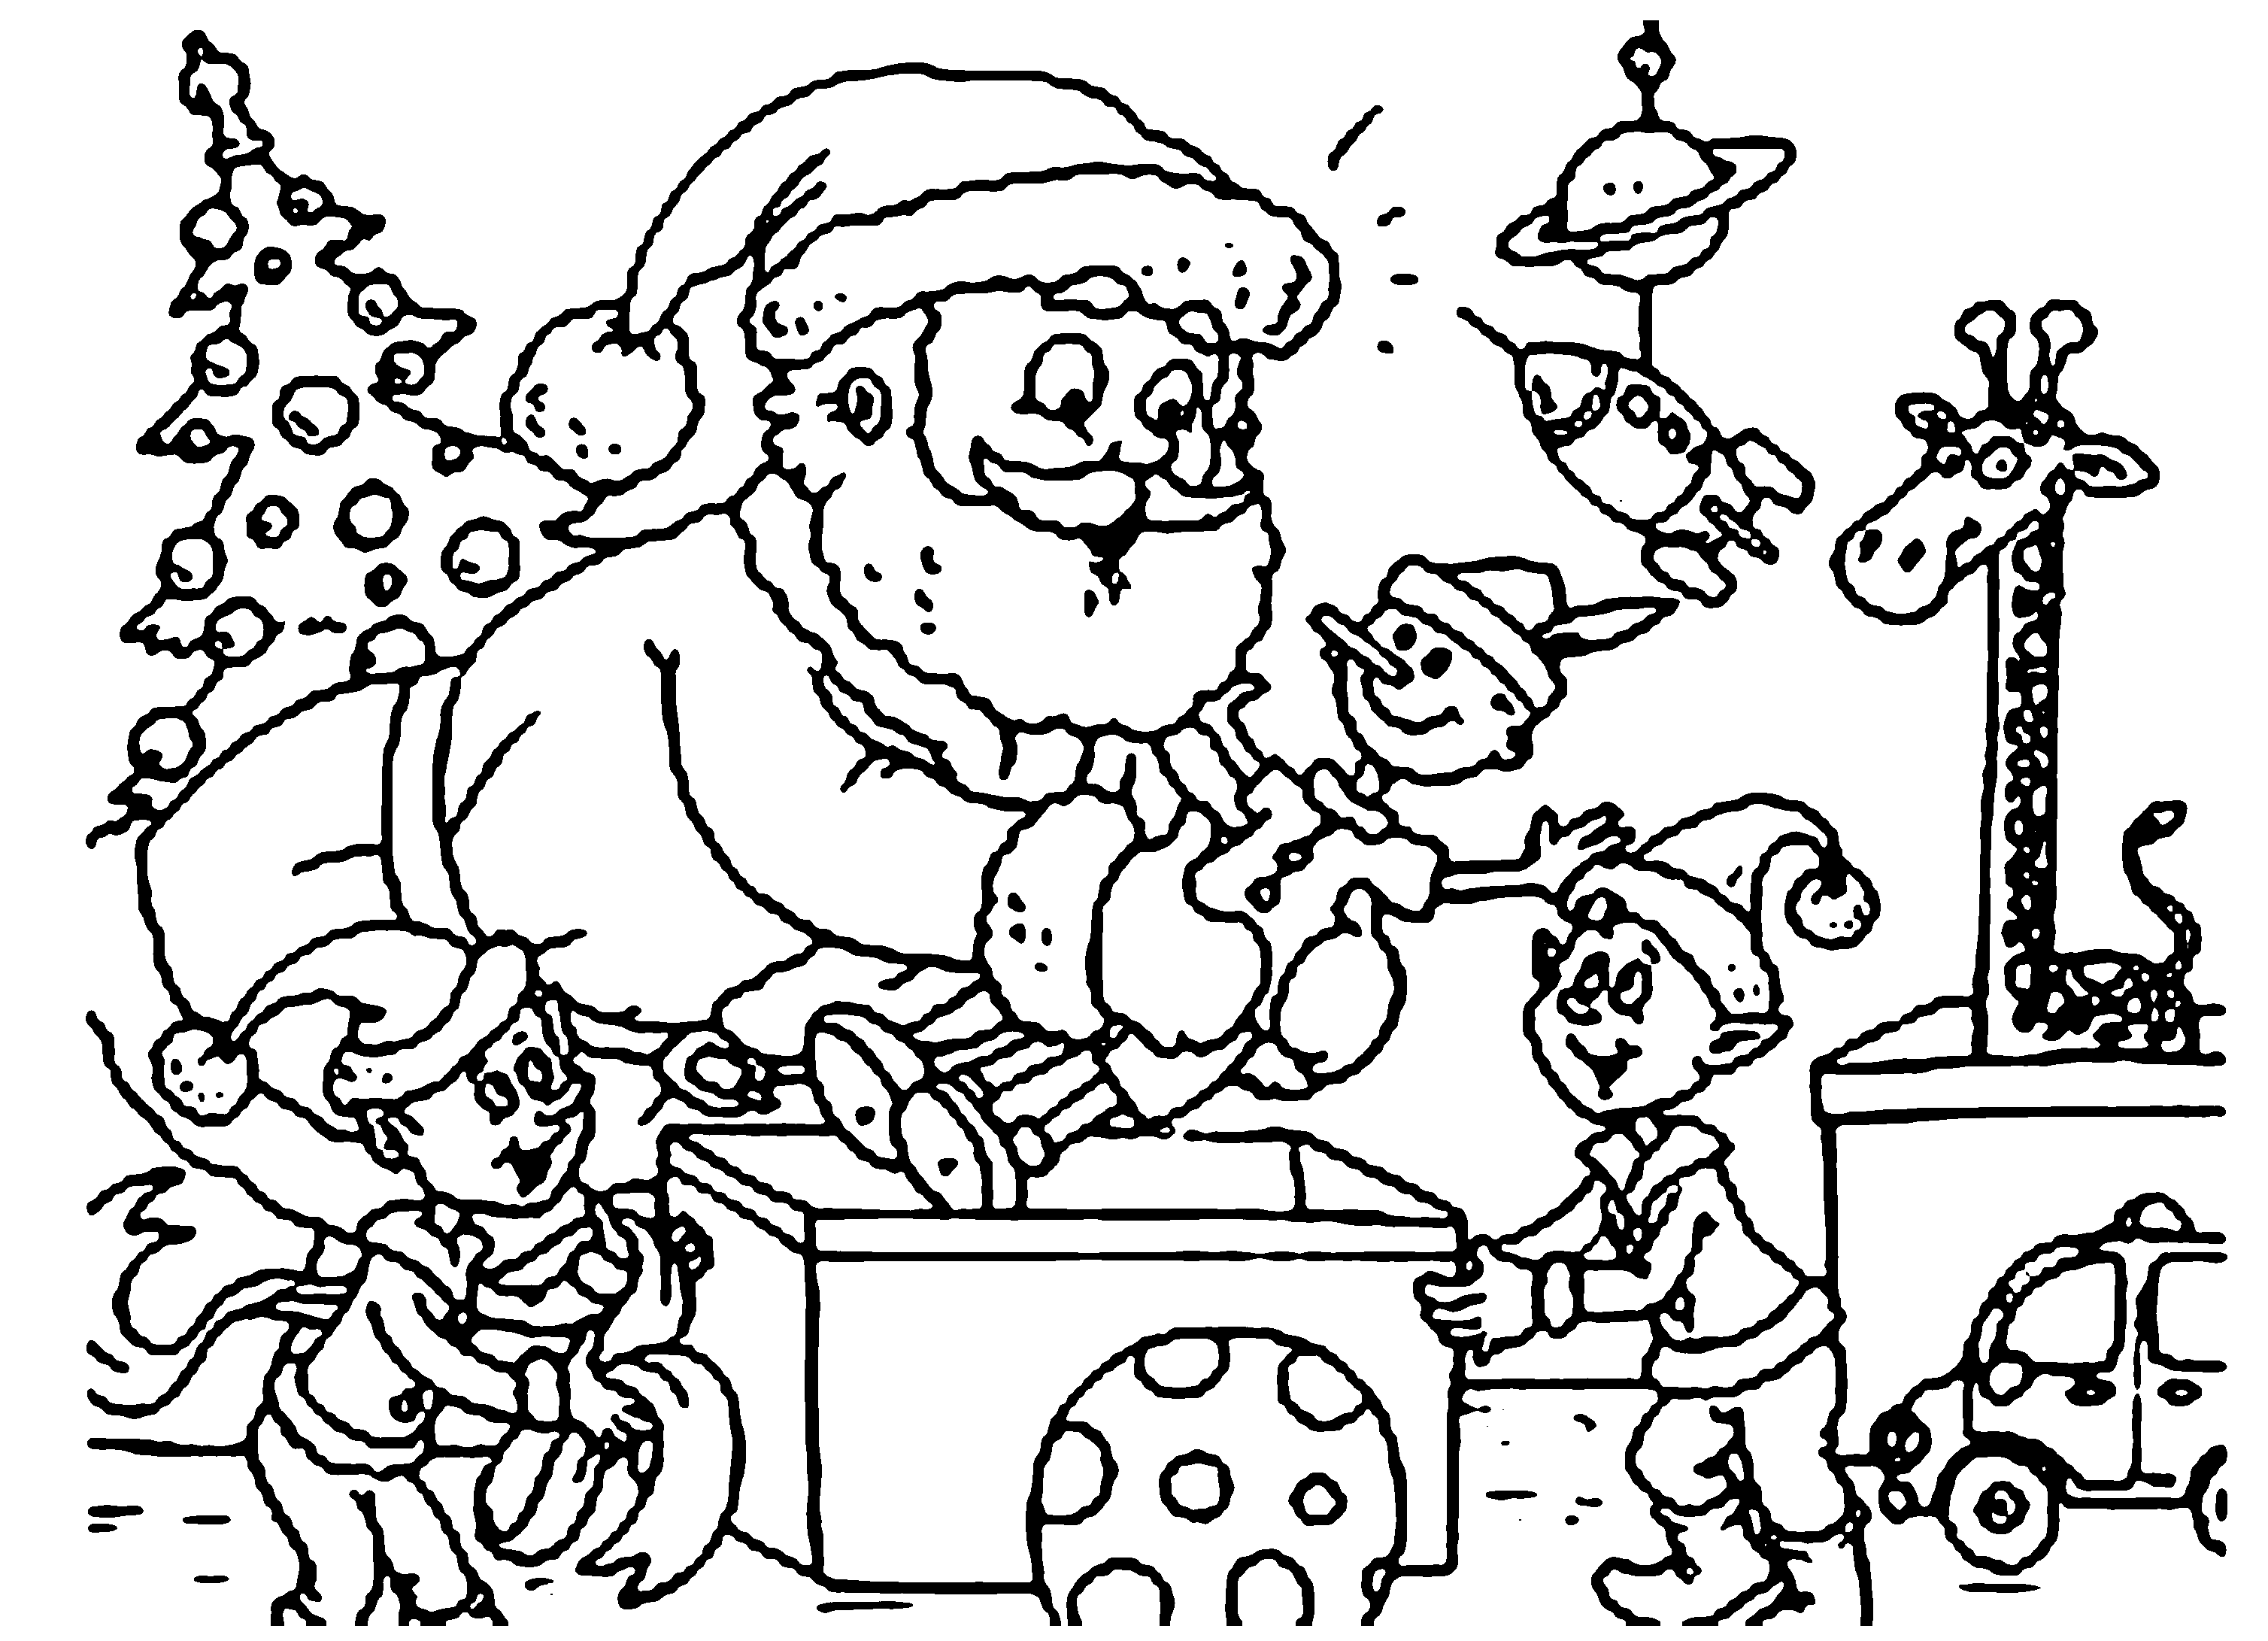 Elf Coloring Pages Online Elf Coloring Pages Free Girl Elf On The ...